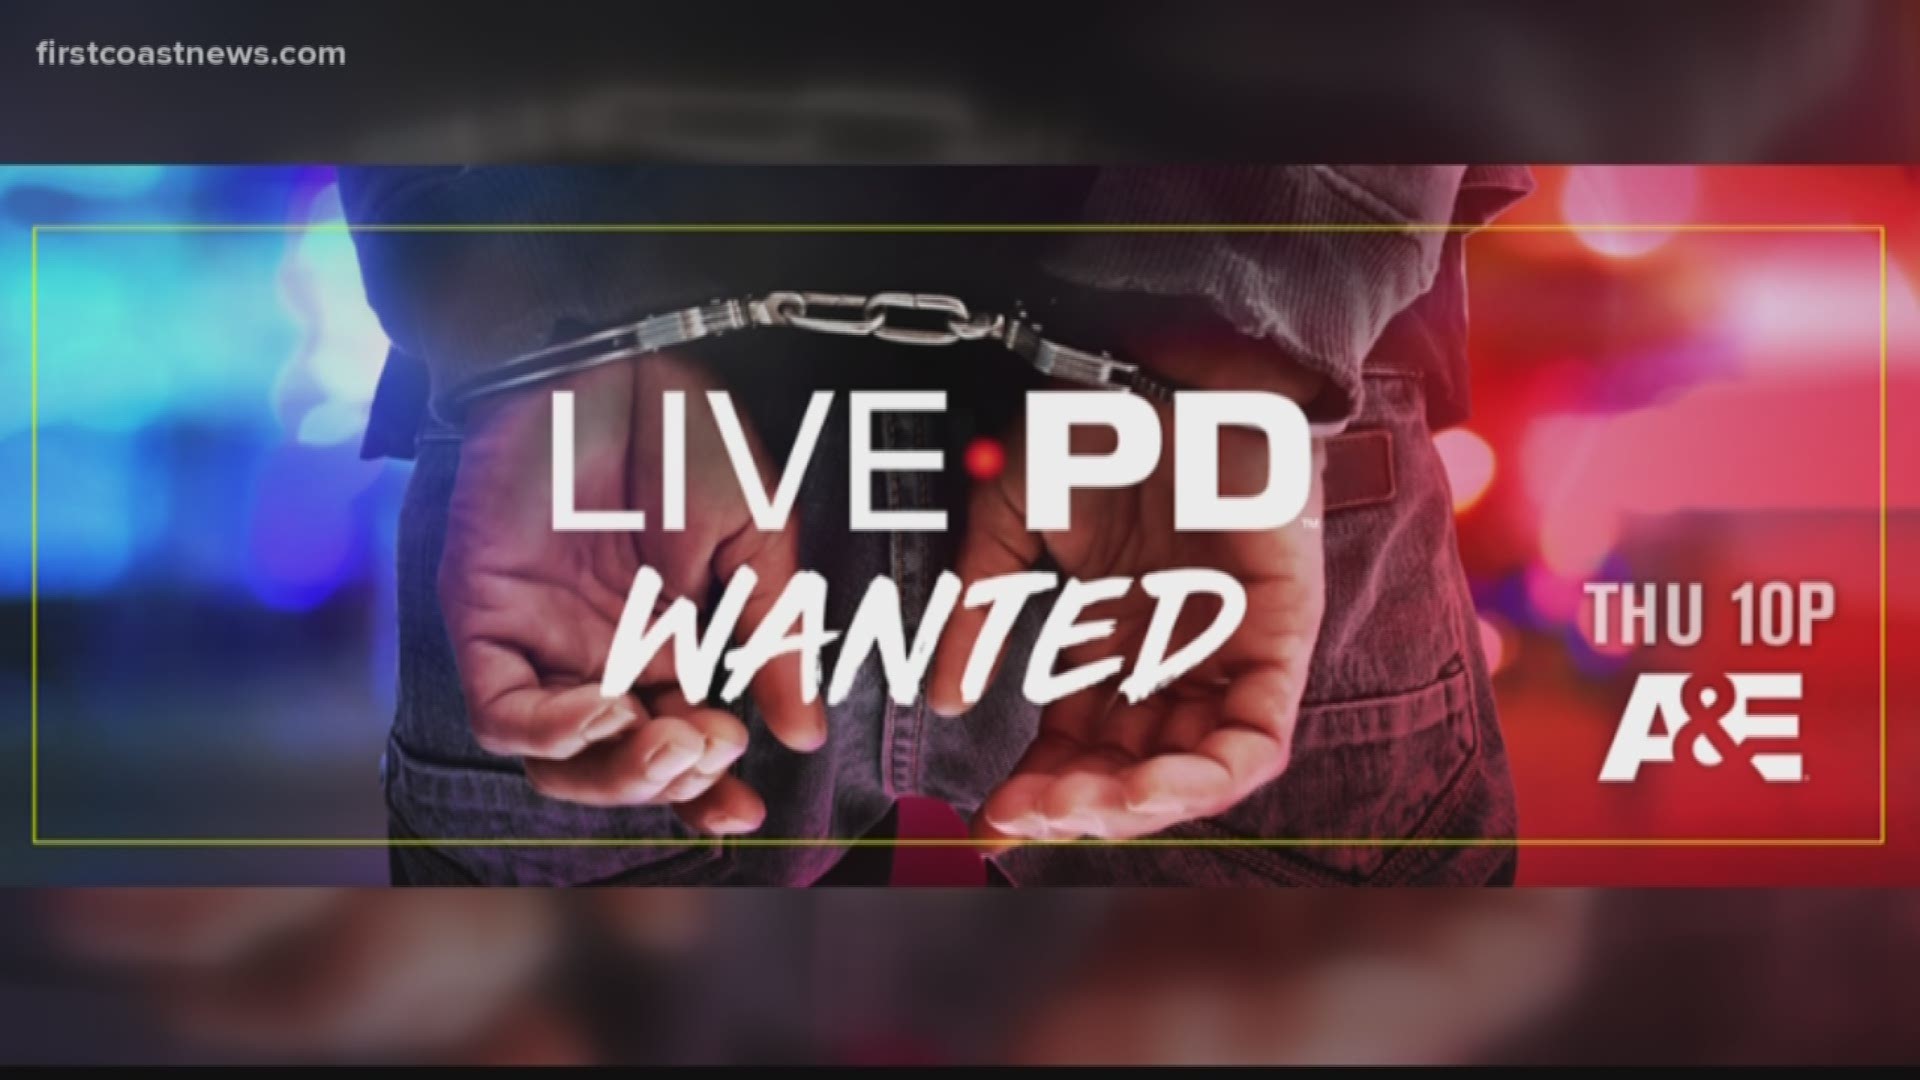 'Live PD Wanted' follows police departments from across the country as they patrol their communities. The Bradford County will be featured on Thursday at 10 p.m.